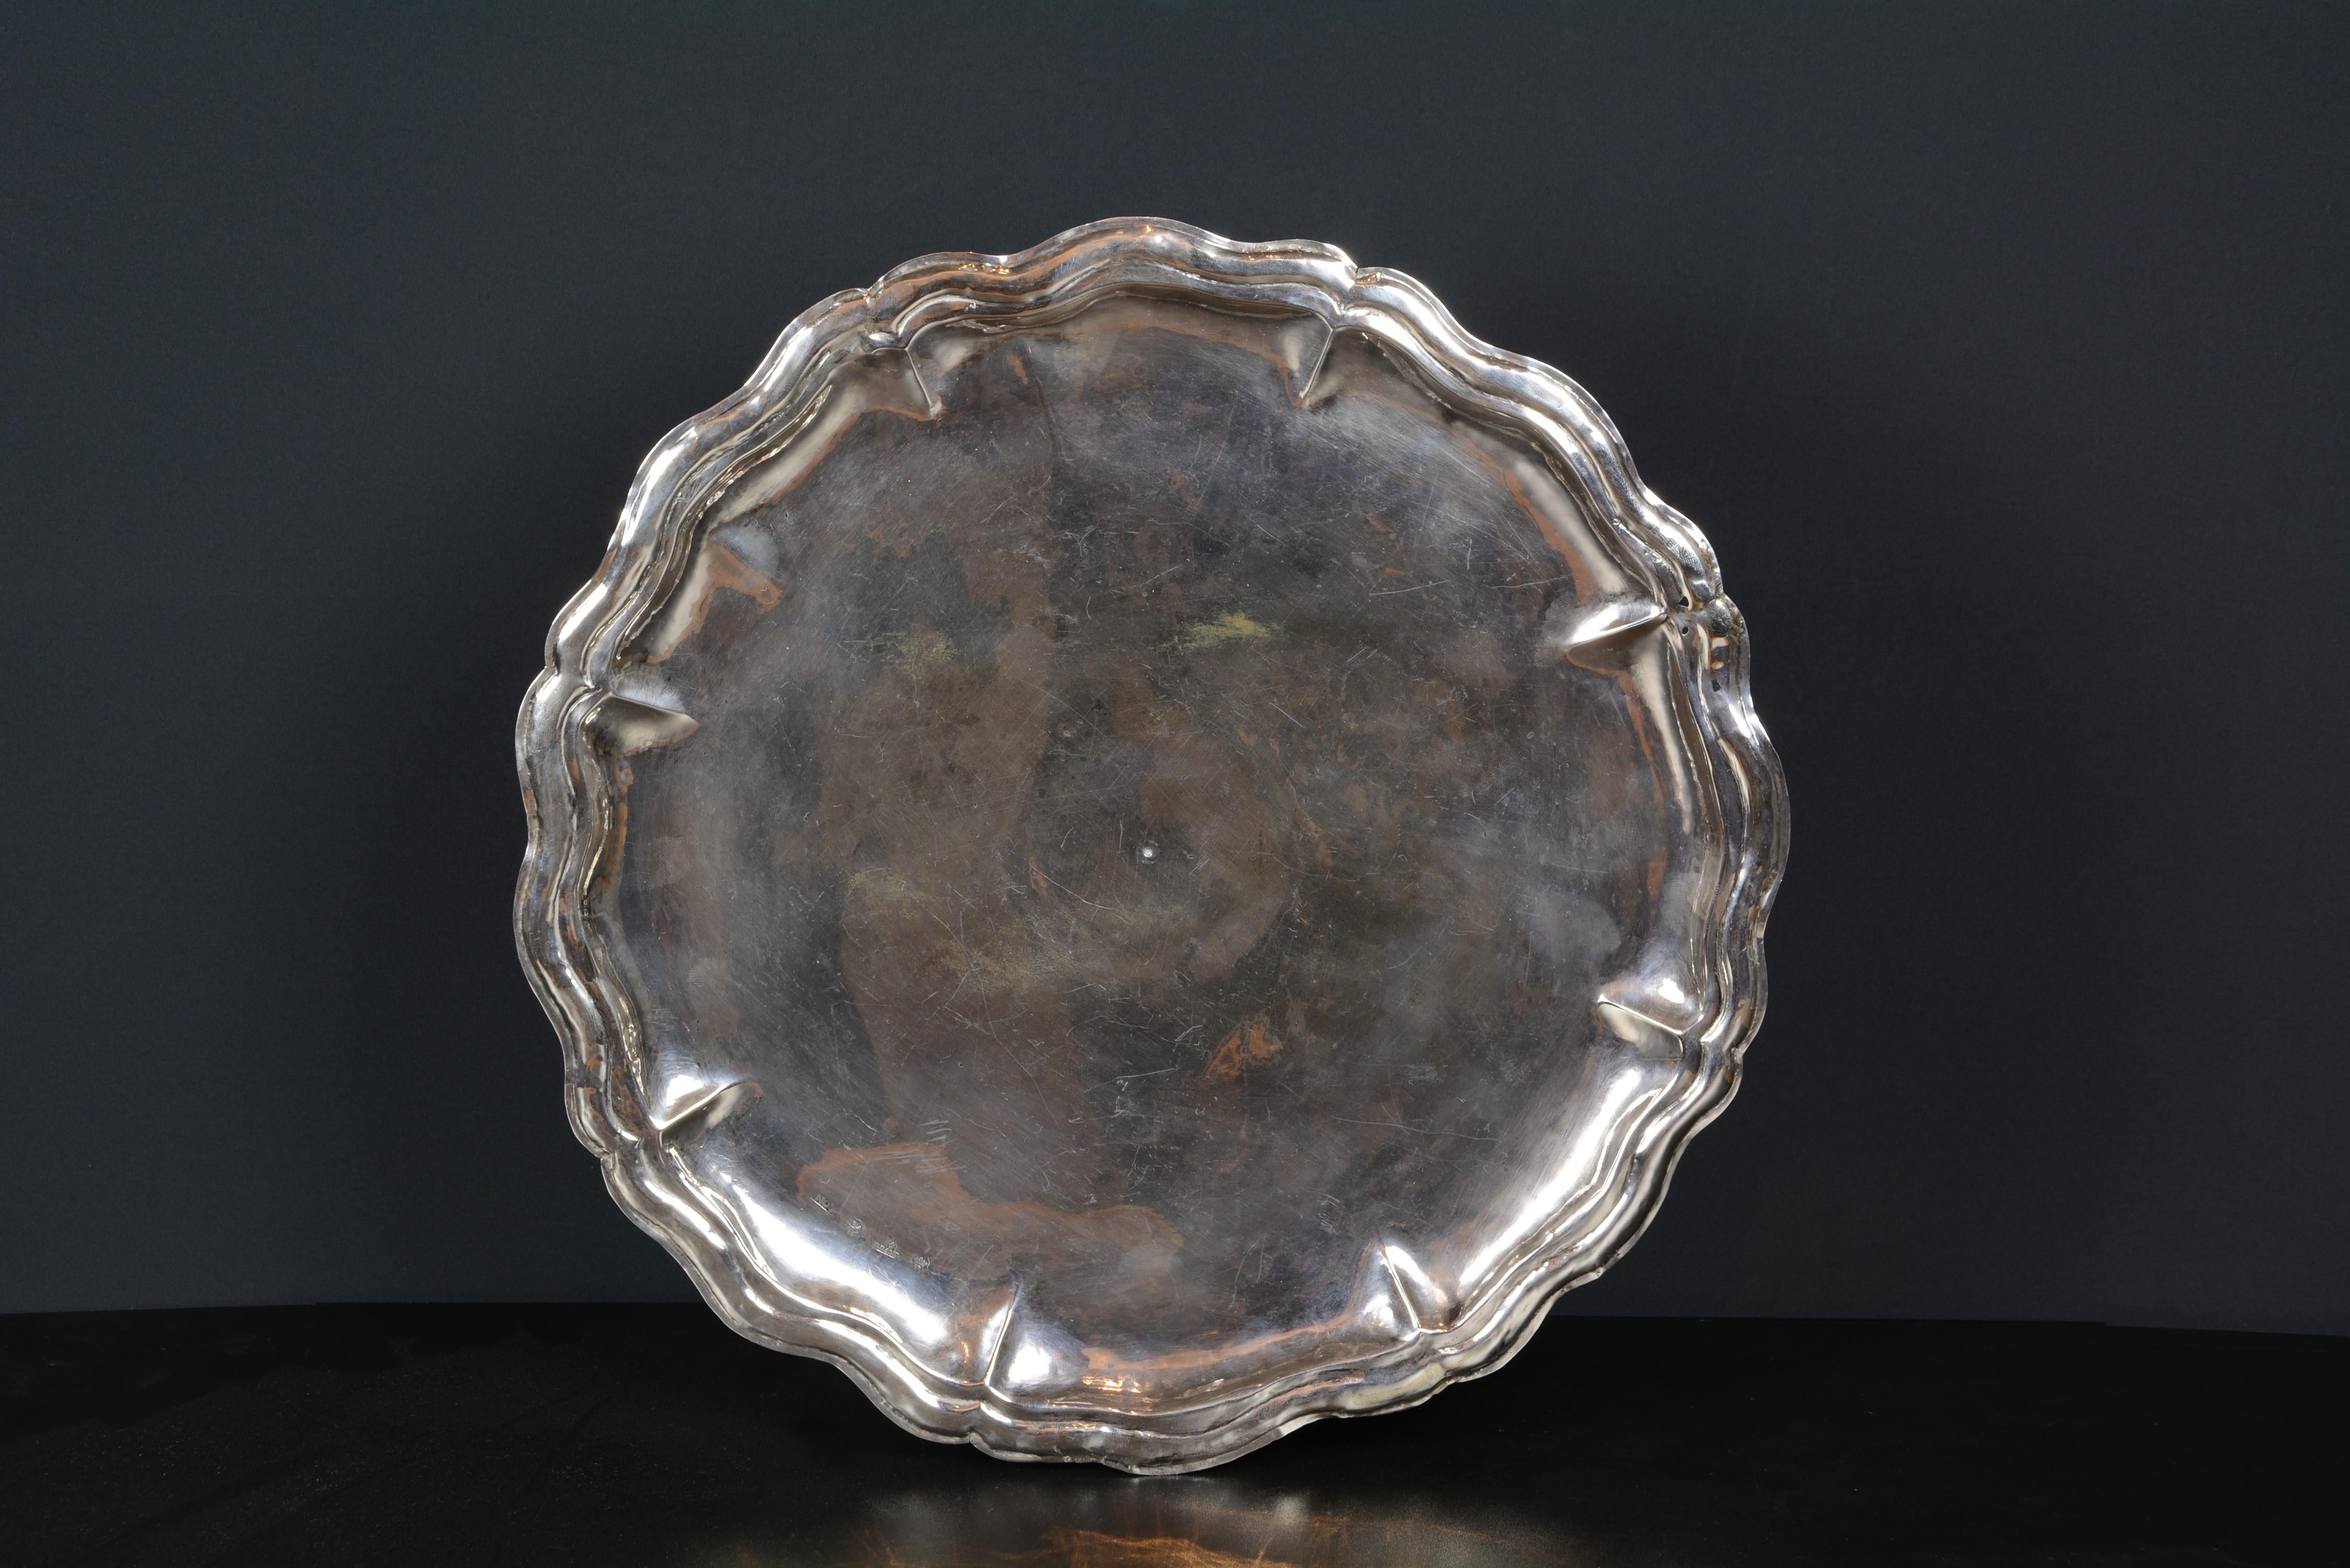 Salva cordobesa in silver, 1759-1768. With brands. Córdoba, Spain.
Weight: 820 g. 
Salva in silver Rococo style, with punches of Cordoba and the score Bartolomé Gálvez y Aranda. It has a high, stepped foot, with a circular base, adorned with